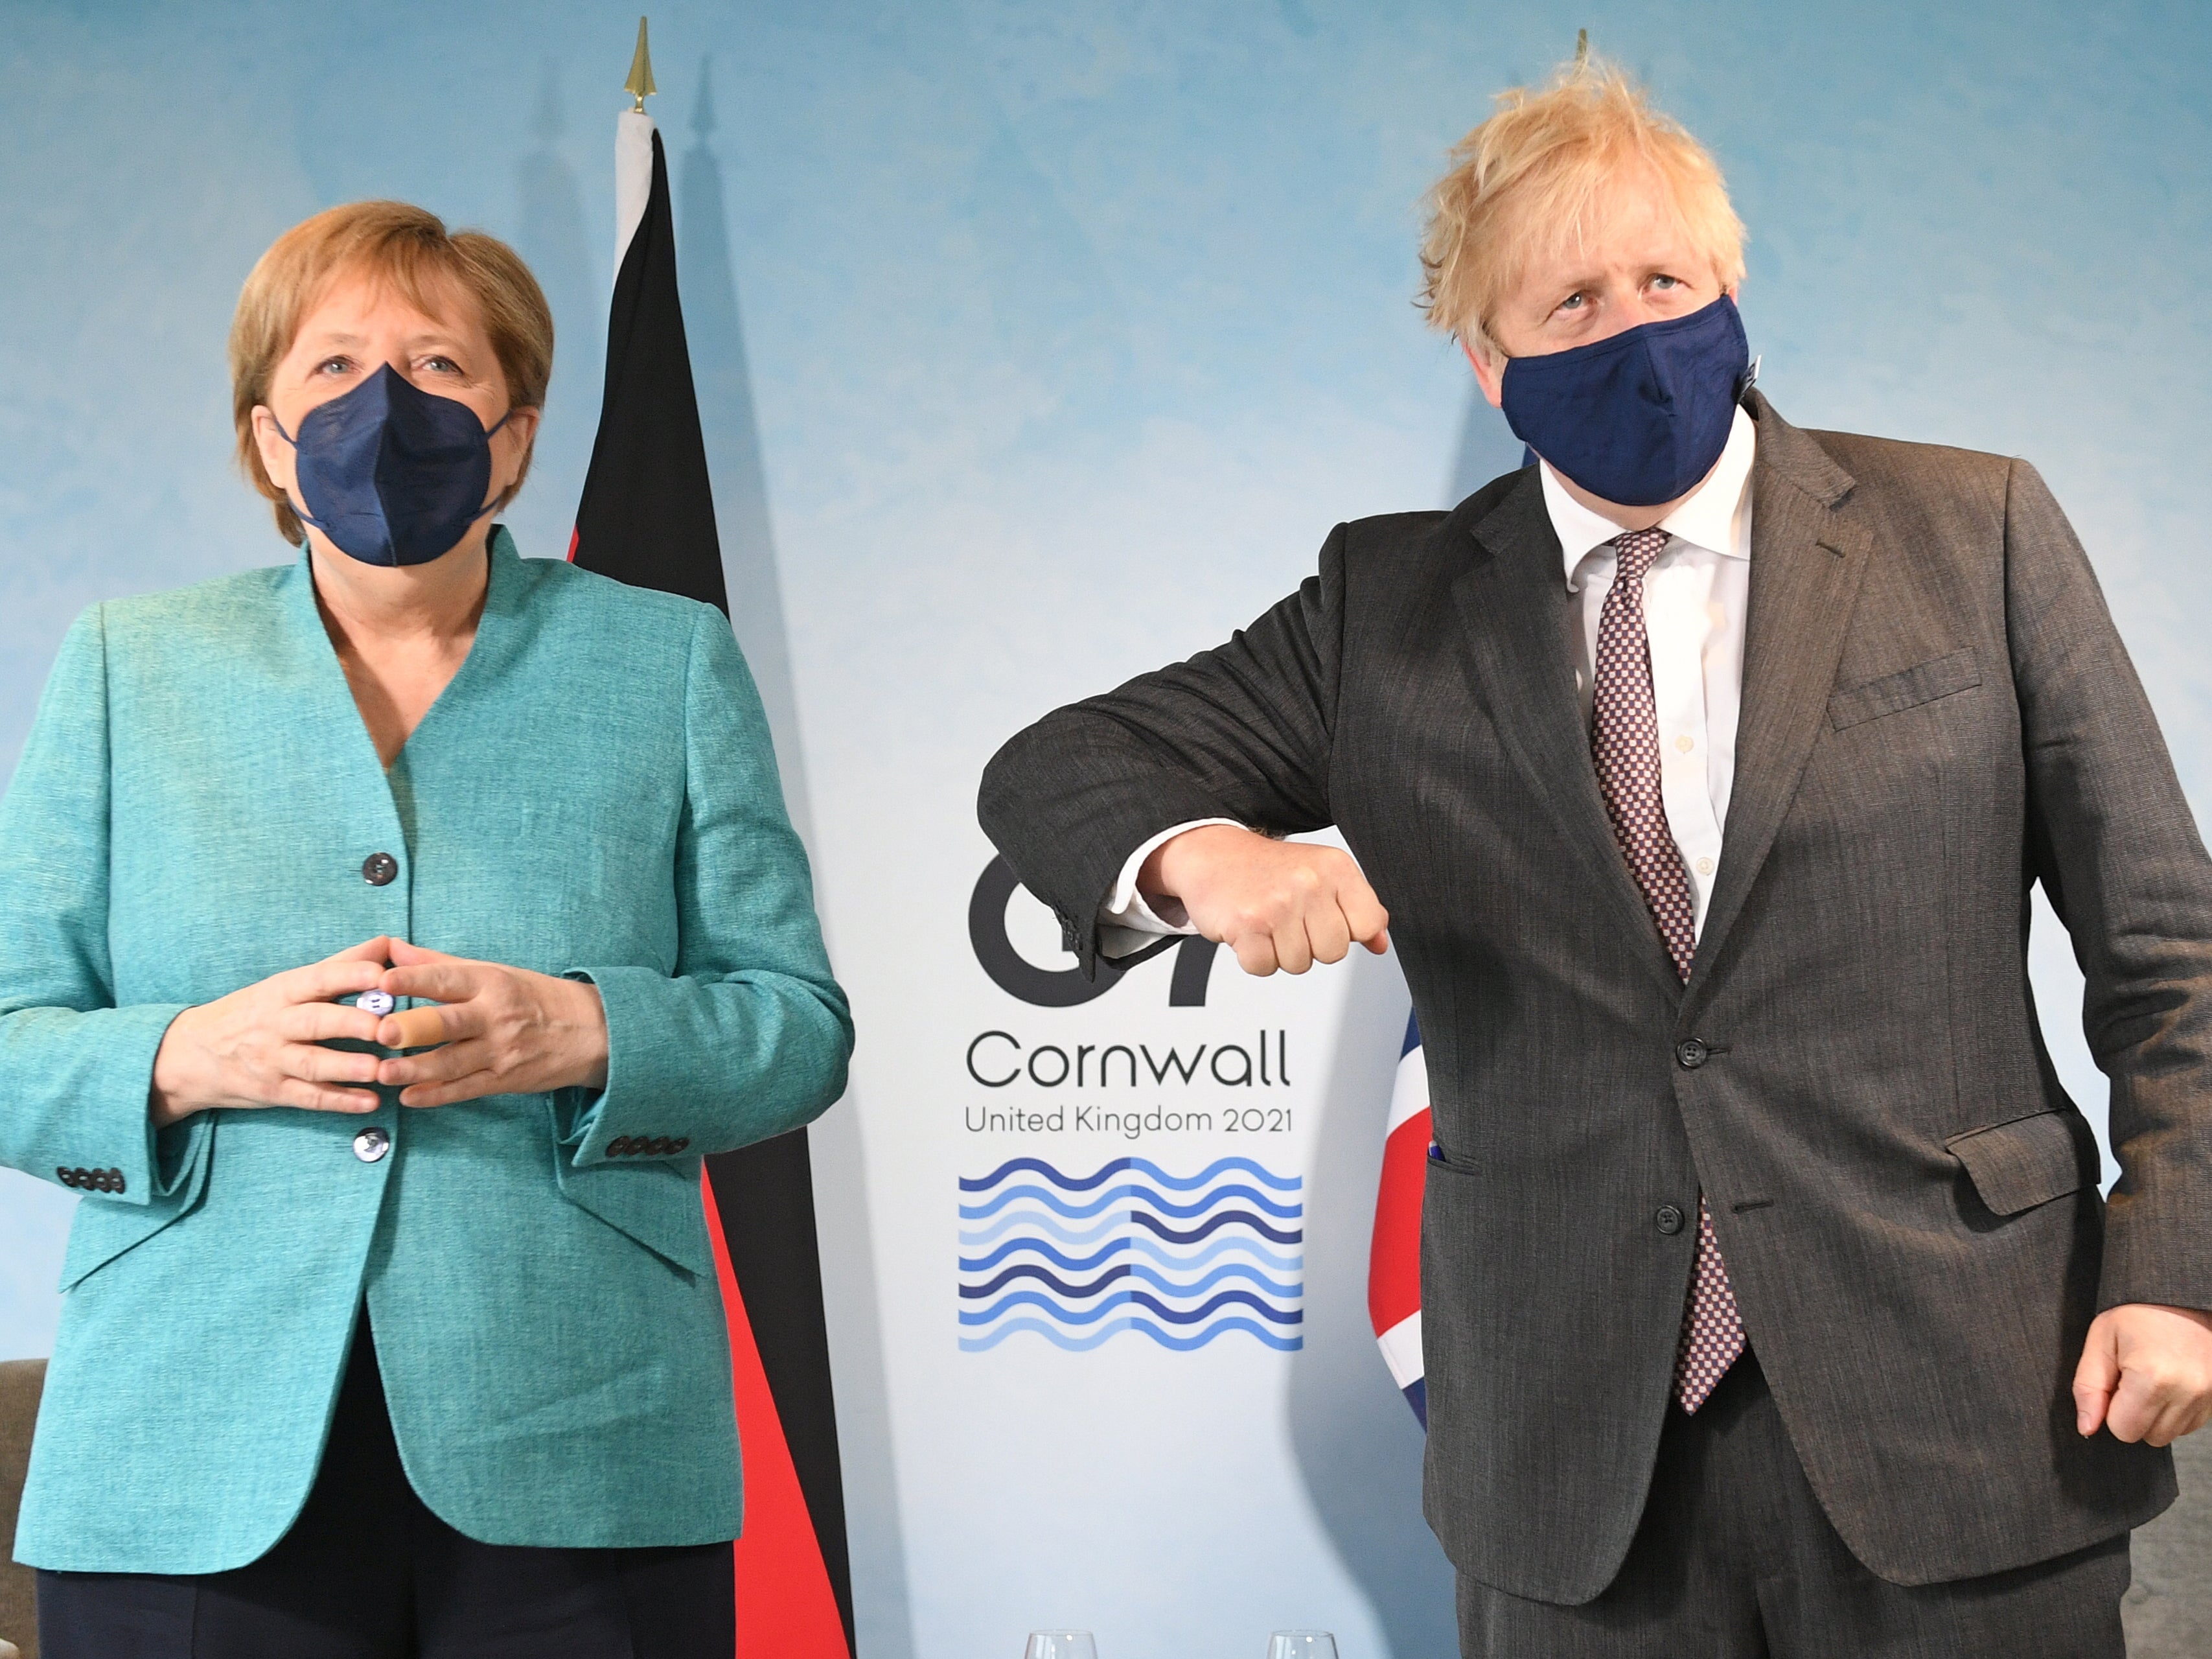 Boris Johnson and Angela Merkel haven’t always seen eye to eye, but the PM cannot afford a decline in relations when the incoming administration takes office